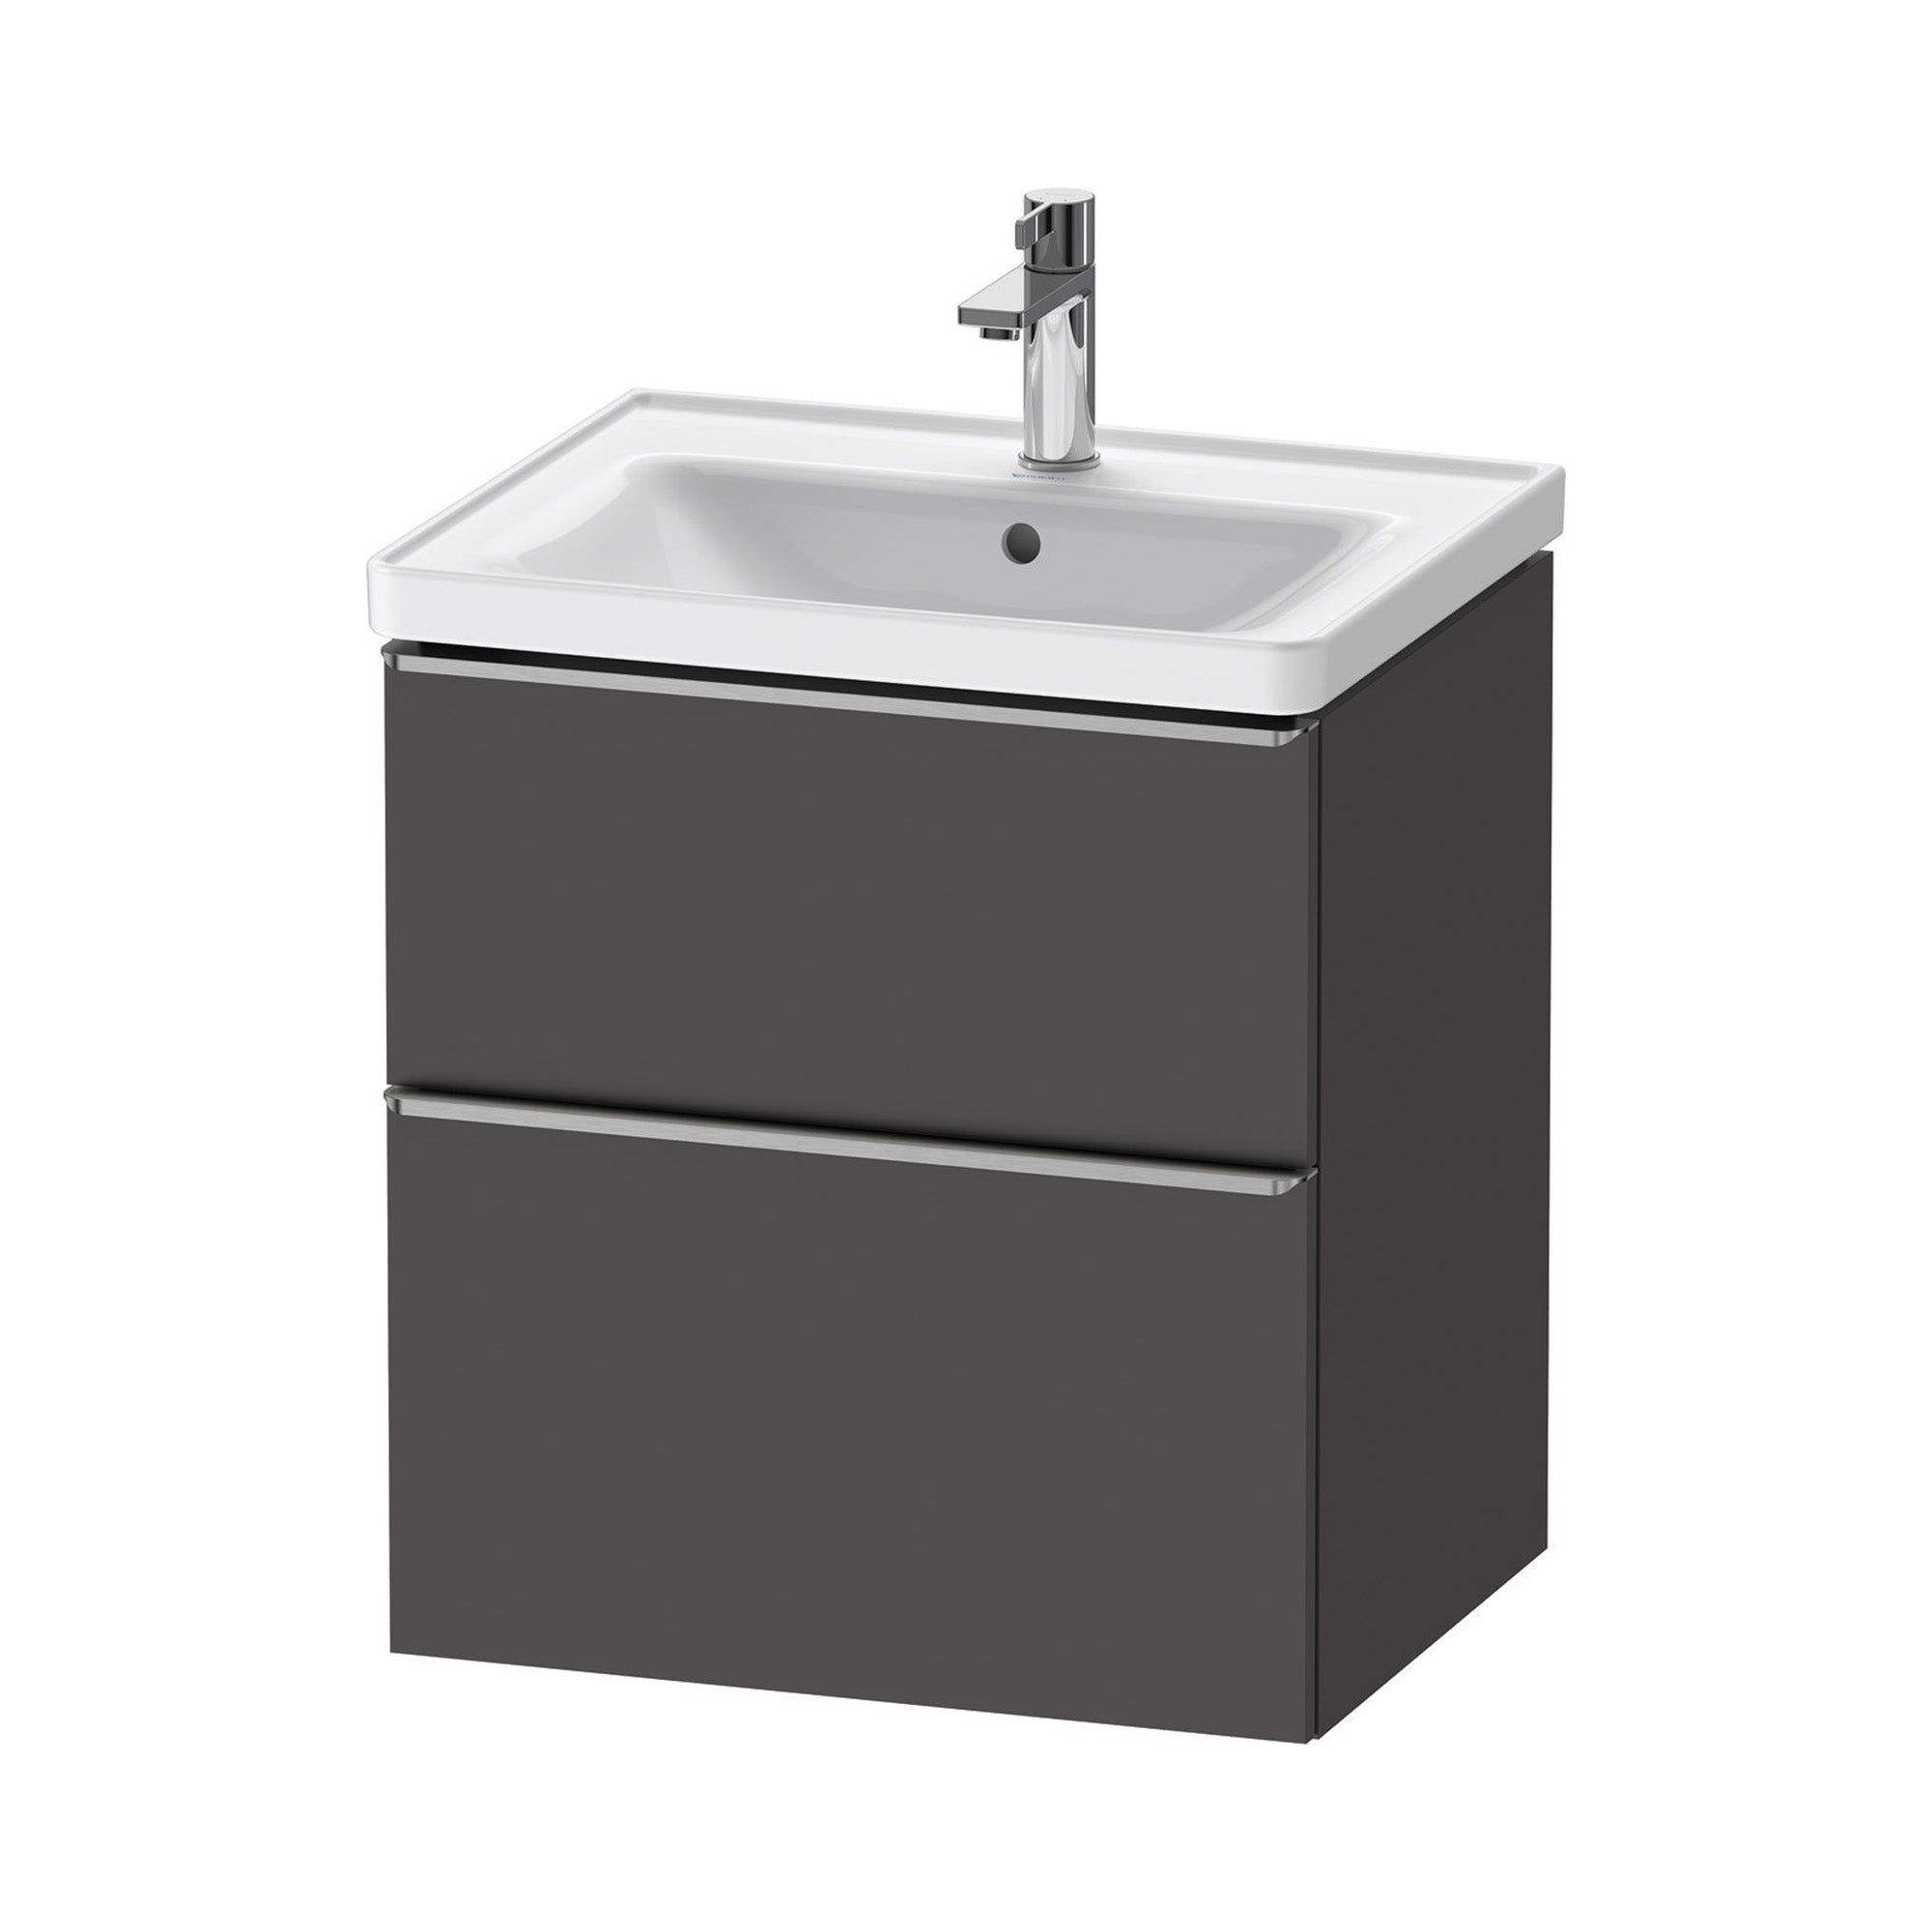 duravit d-neo 600 wall mounted vanity unit with d-neo basin matt graphite stainless steel handles